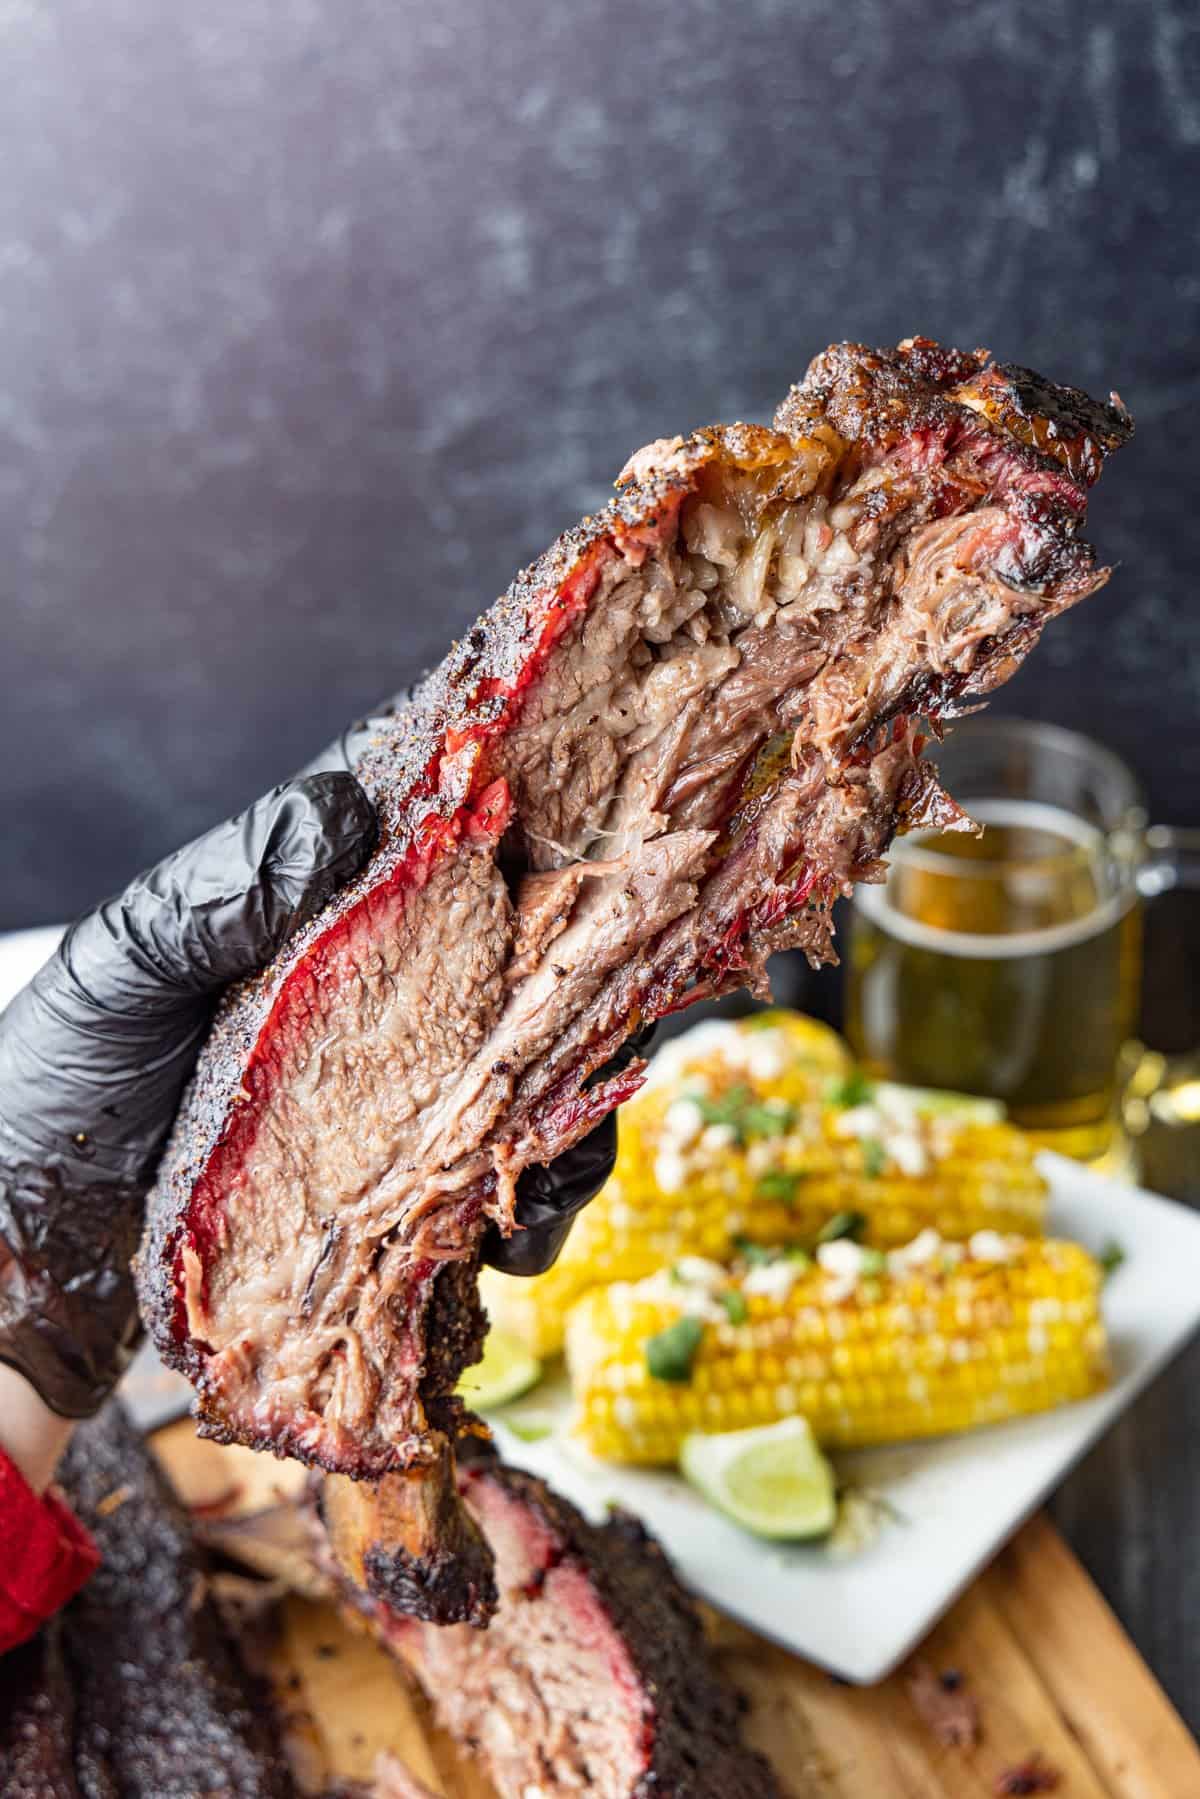 A large beef rib held in hand with corn and beer in background.